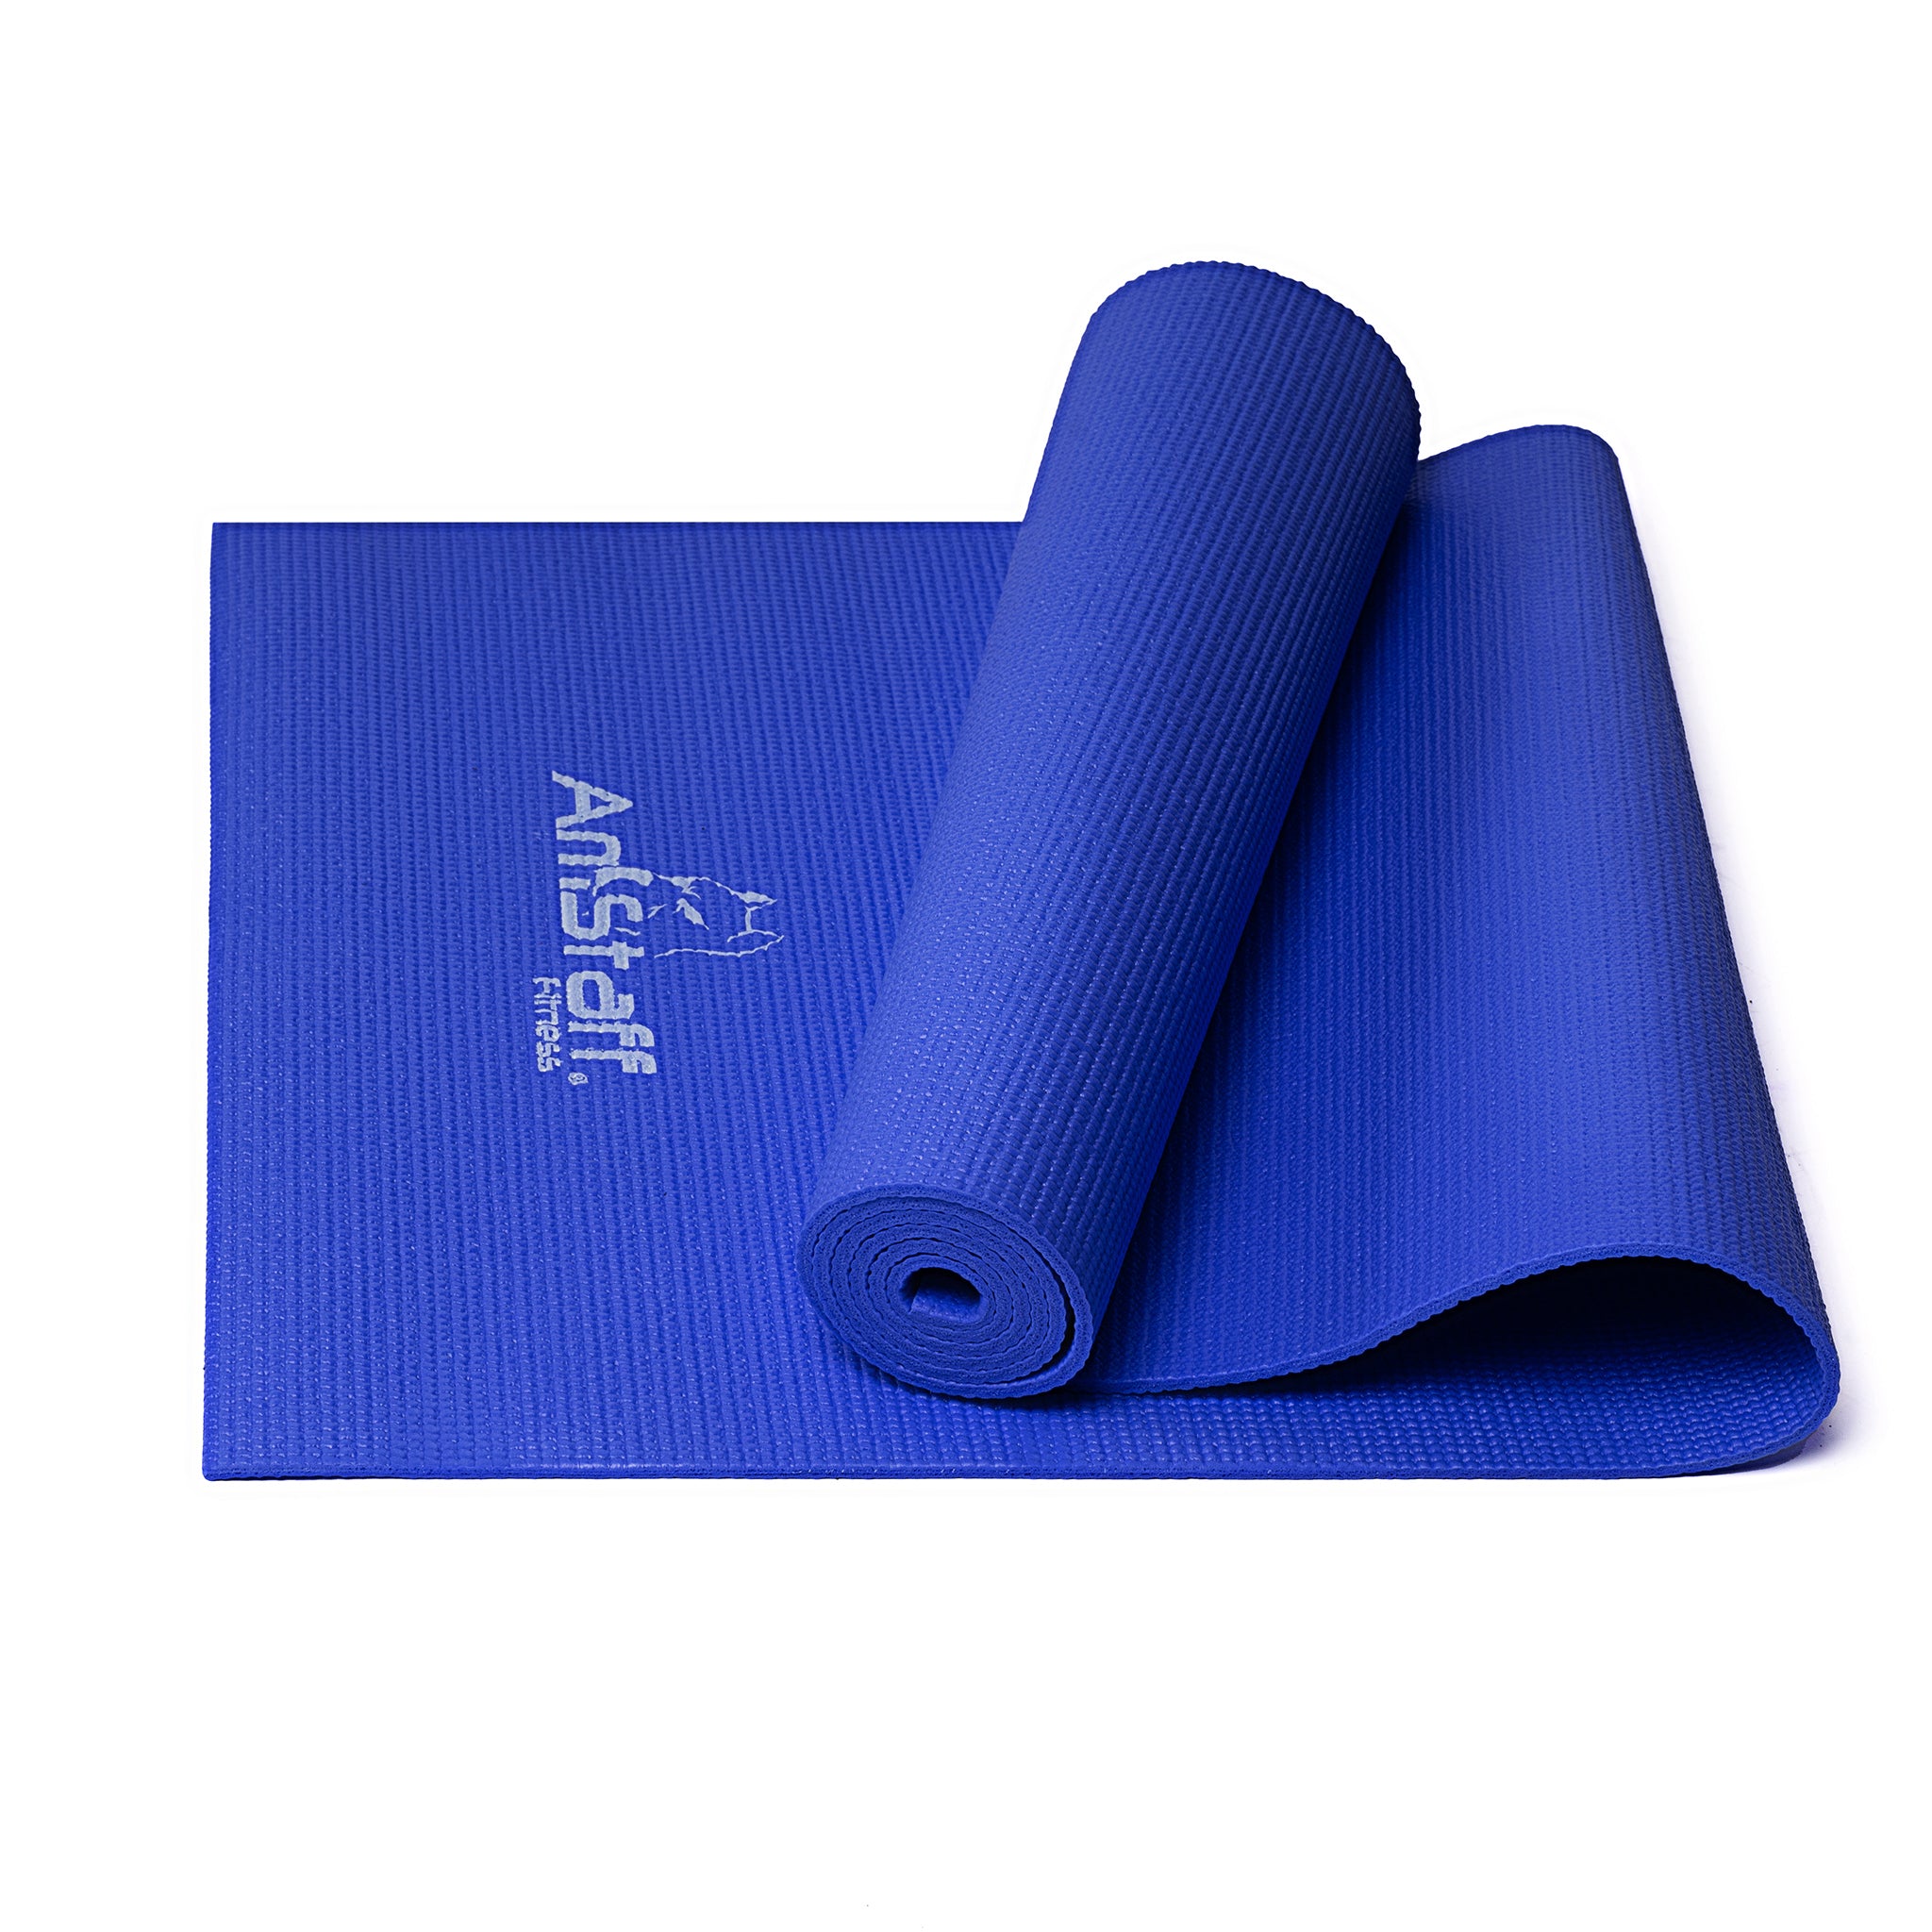 STRUCTURE FITNESS 3 Layer Yoga Mat - Non-Slip, Fitness Exercise Mat for  Home Gym Workouts & Pilates - Orange